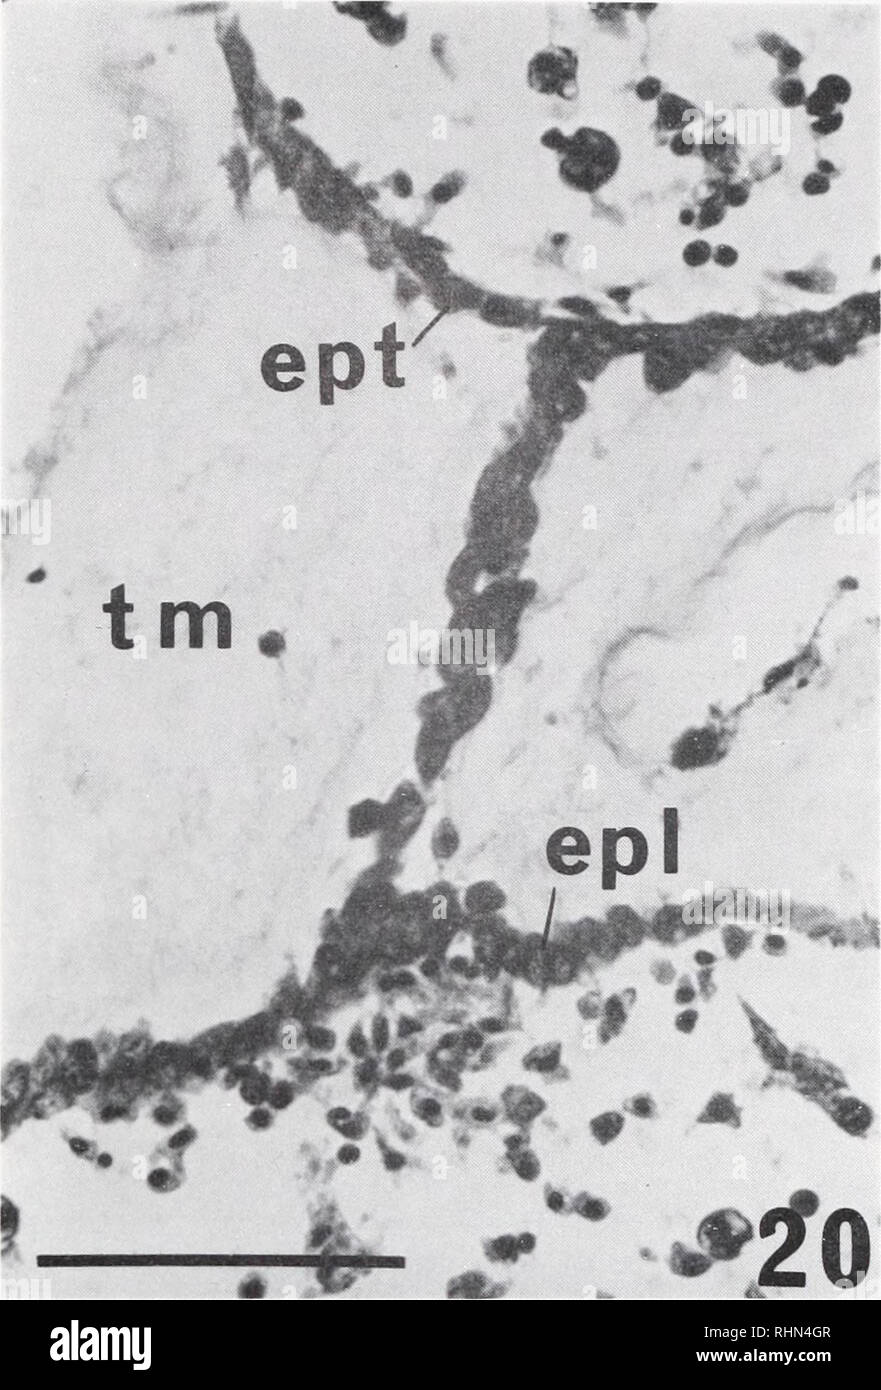 . The Biological bulletin. Biology; Zoology; Biology; Marine Biology. COLONY SPECIFICITY IN PEROPHORA 177. FIGURE 20. A histological figure of nonfusion type B, after detachment of the two stolons. Many amoebocytes were observed in the lumen of the 1-stolon. epl, epidermal cells of the 1-stolon; ept, epidermal cells of the t-stolon; tm, test matrix. Scale bar = 50 ^m. Fusibility between different colonies The two types of nonfusion did not take place at random. A particular com- bination of incompatible colonies always exhibited only one type of nonfusion. We first tested the fusibility of a c Stock Photo